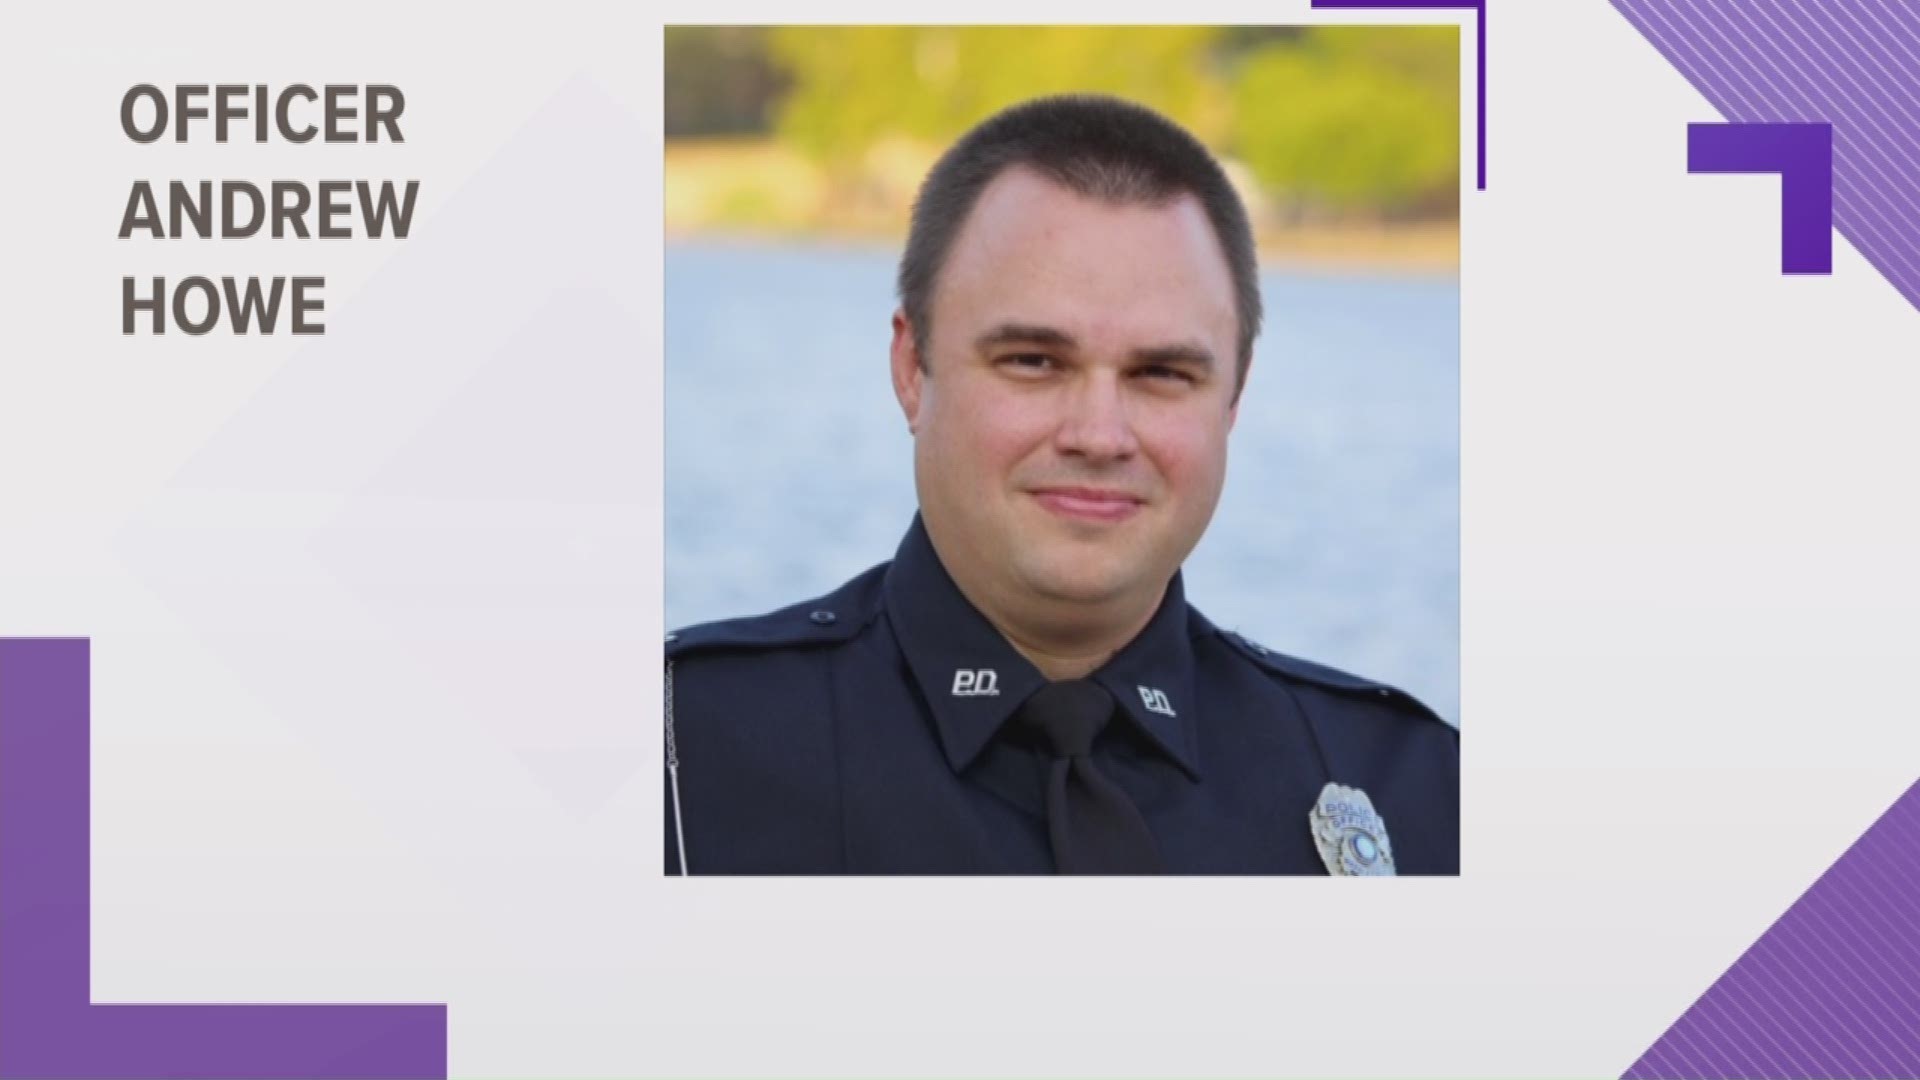 Funeral arrangements have been made for the Marble Falls police officer who died Friday in a motorcycle crash.